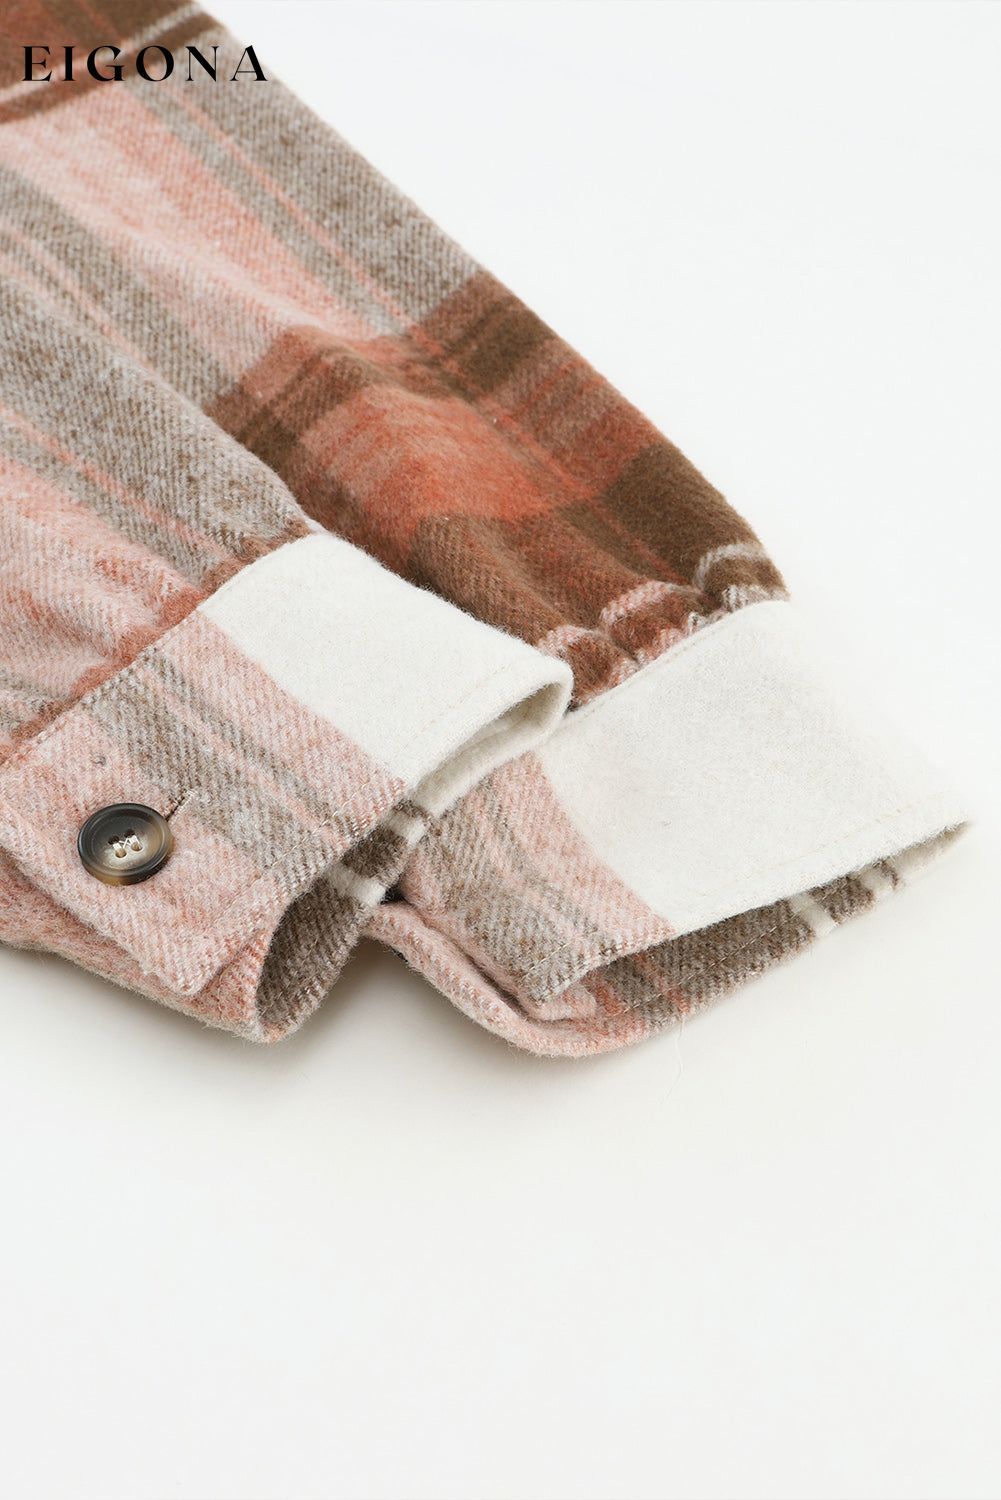 Brown Plaid Print Flap Pockets Long Shacket All In Stock Category Shacket clothes DL Exclusive DL Out West Fall To Winter Hot picks jacket Jackets & Coats Occasion Daily Print Plaid Season Winter Style Casual